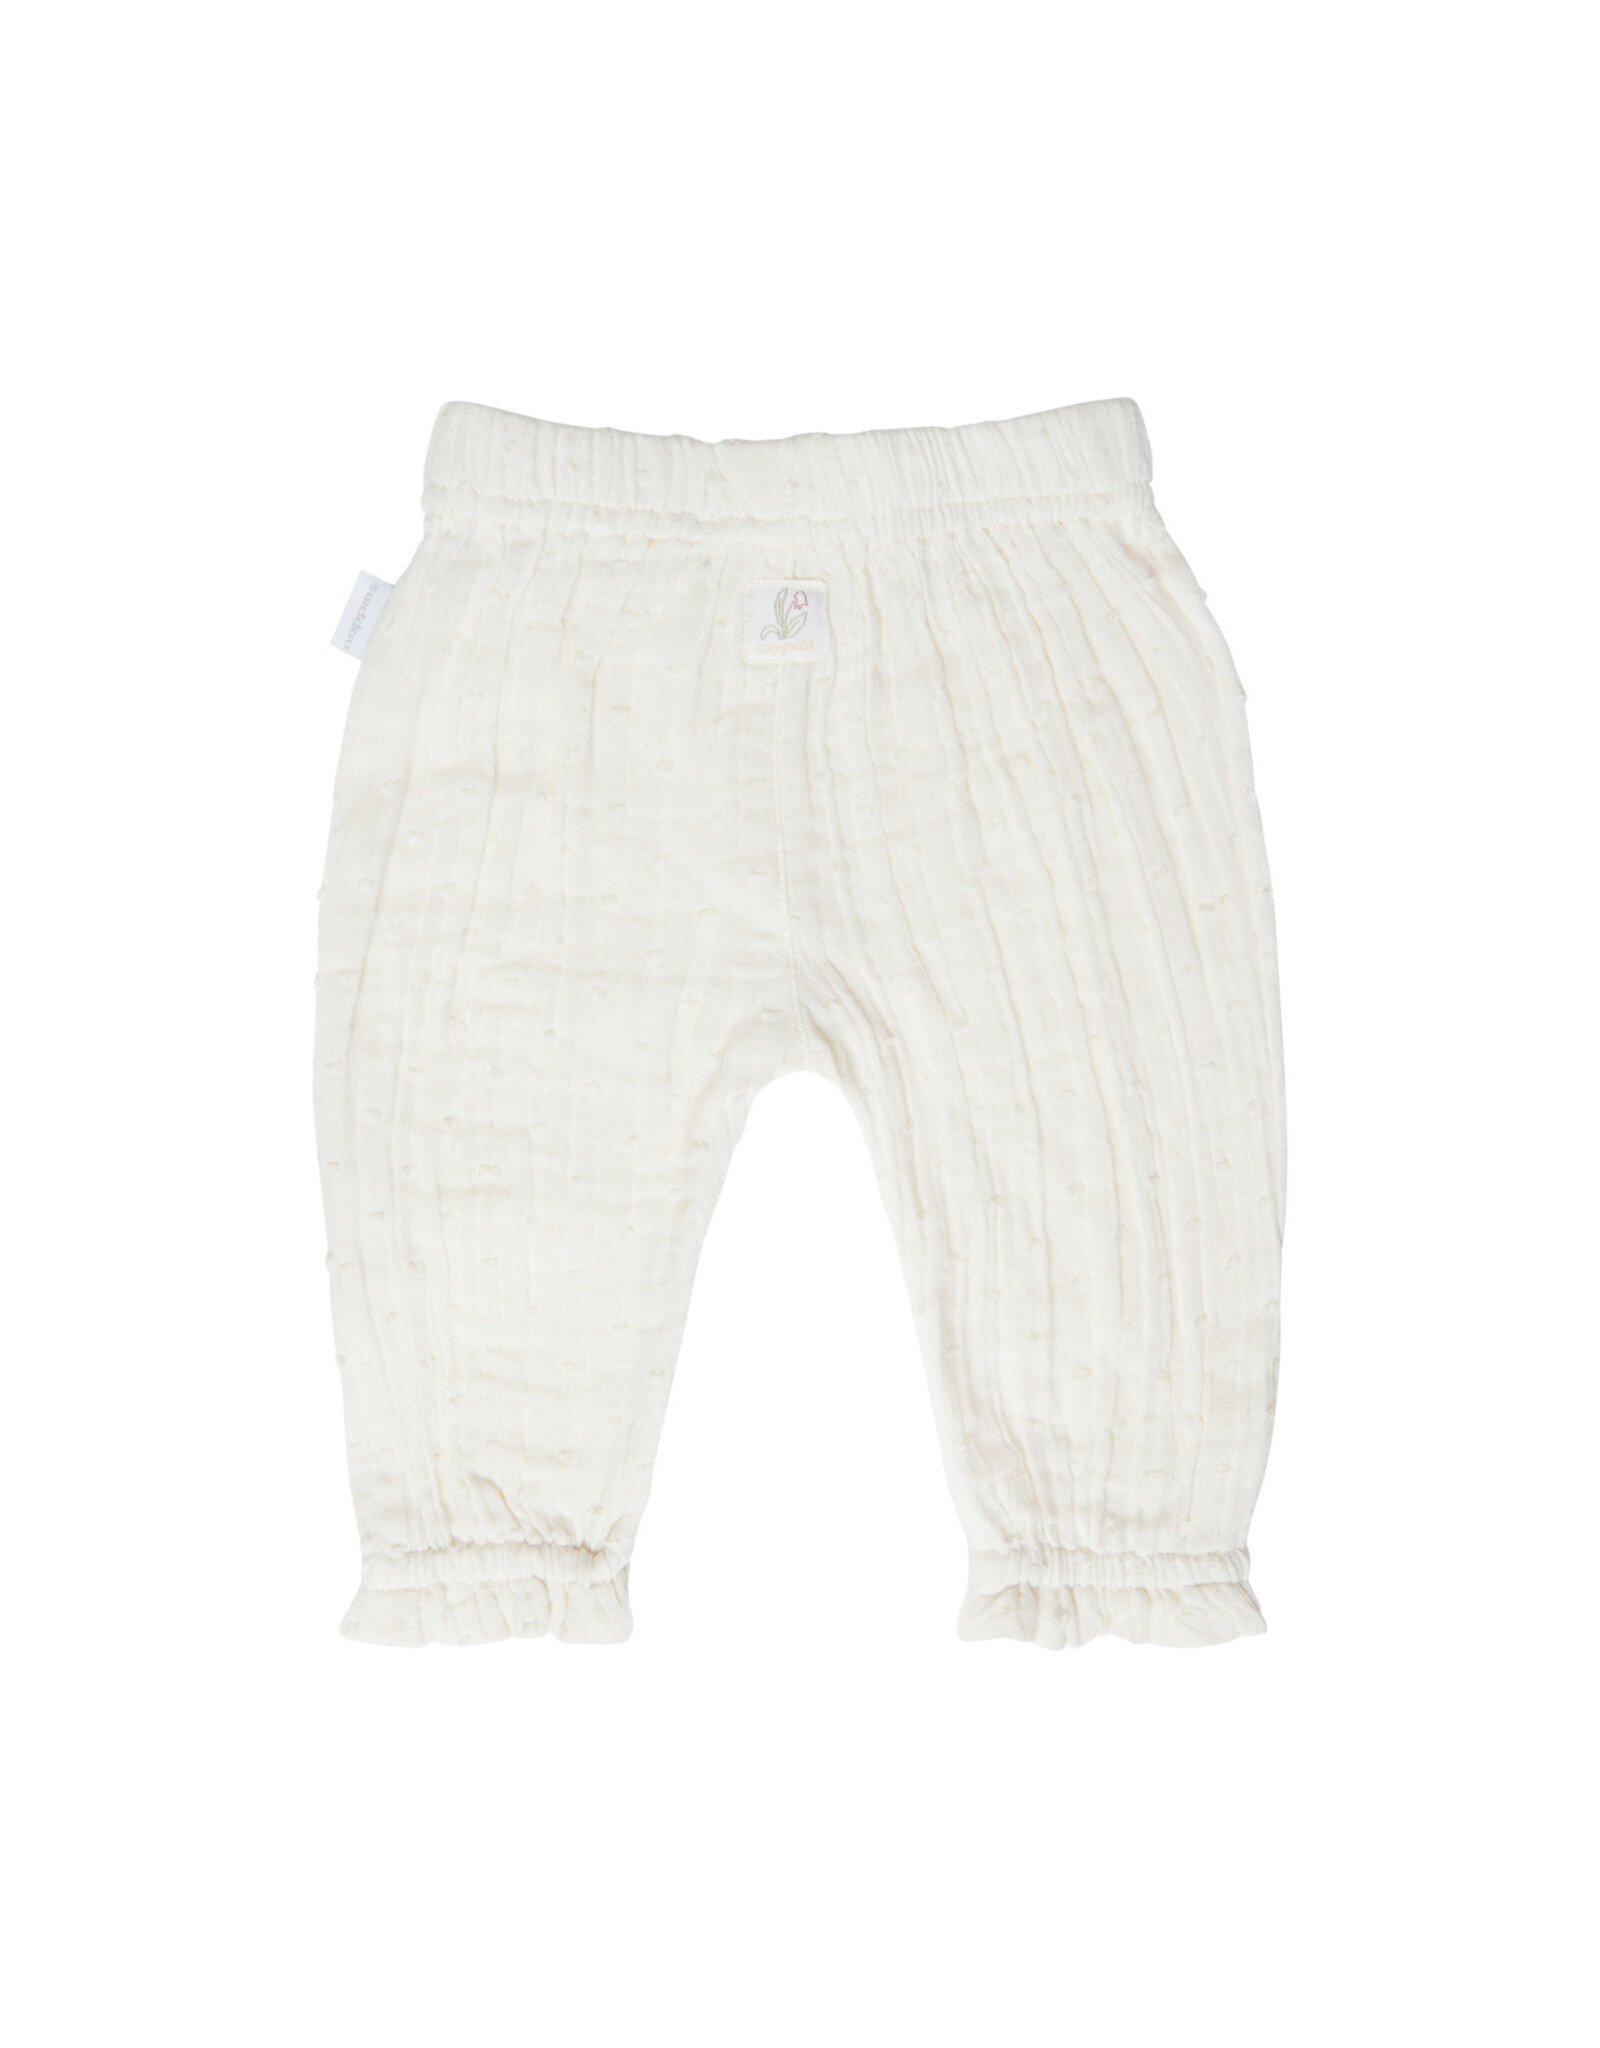 Noppies Girls Pants Cheyenne relaxed fit Whitecap Gray